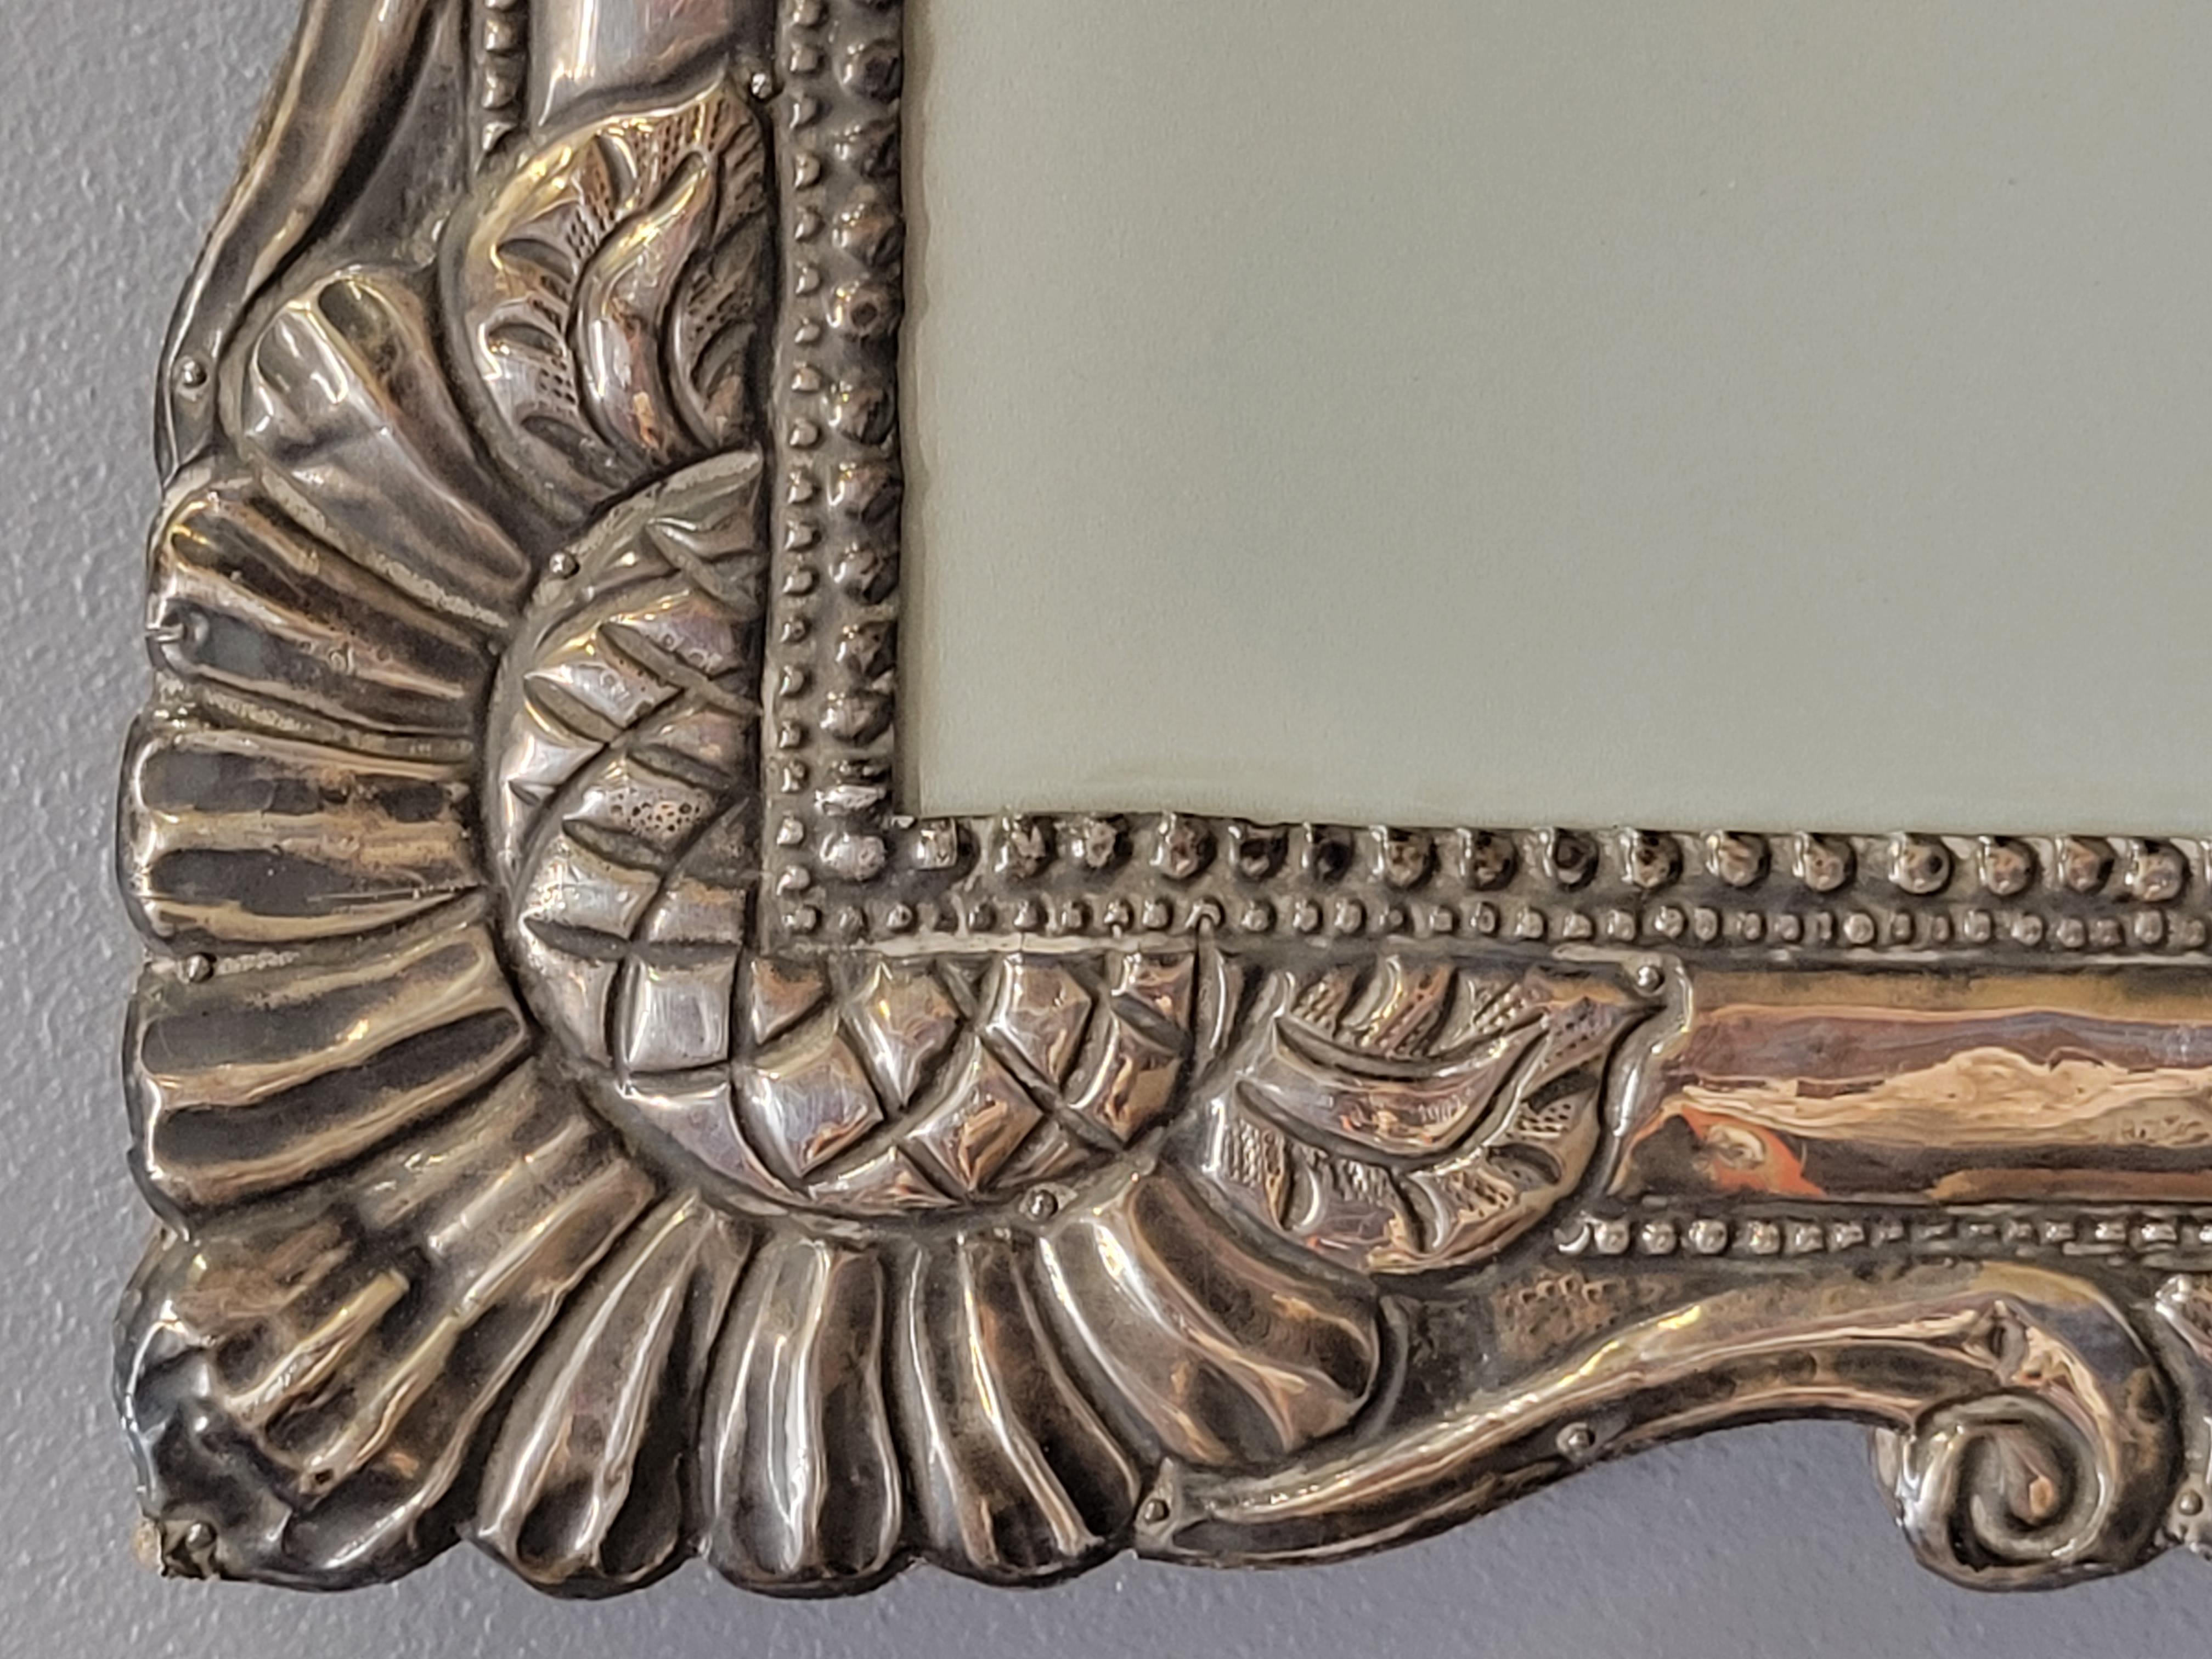 An absolutely stunning antique baroque hand hammered sterling silver picture frame that can be hung either vertically or horizontally. Likely from Mexico or South America, early 1900s or perhaps older. The silver was hand crafted and then attached